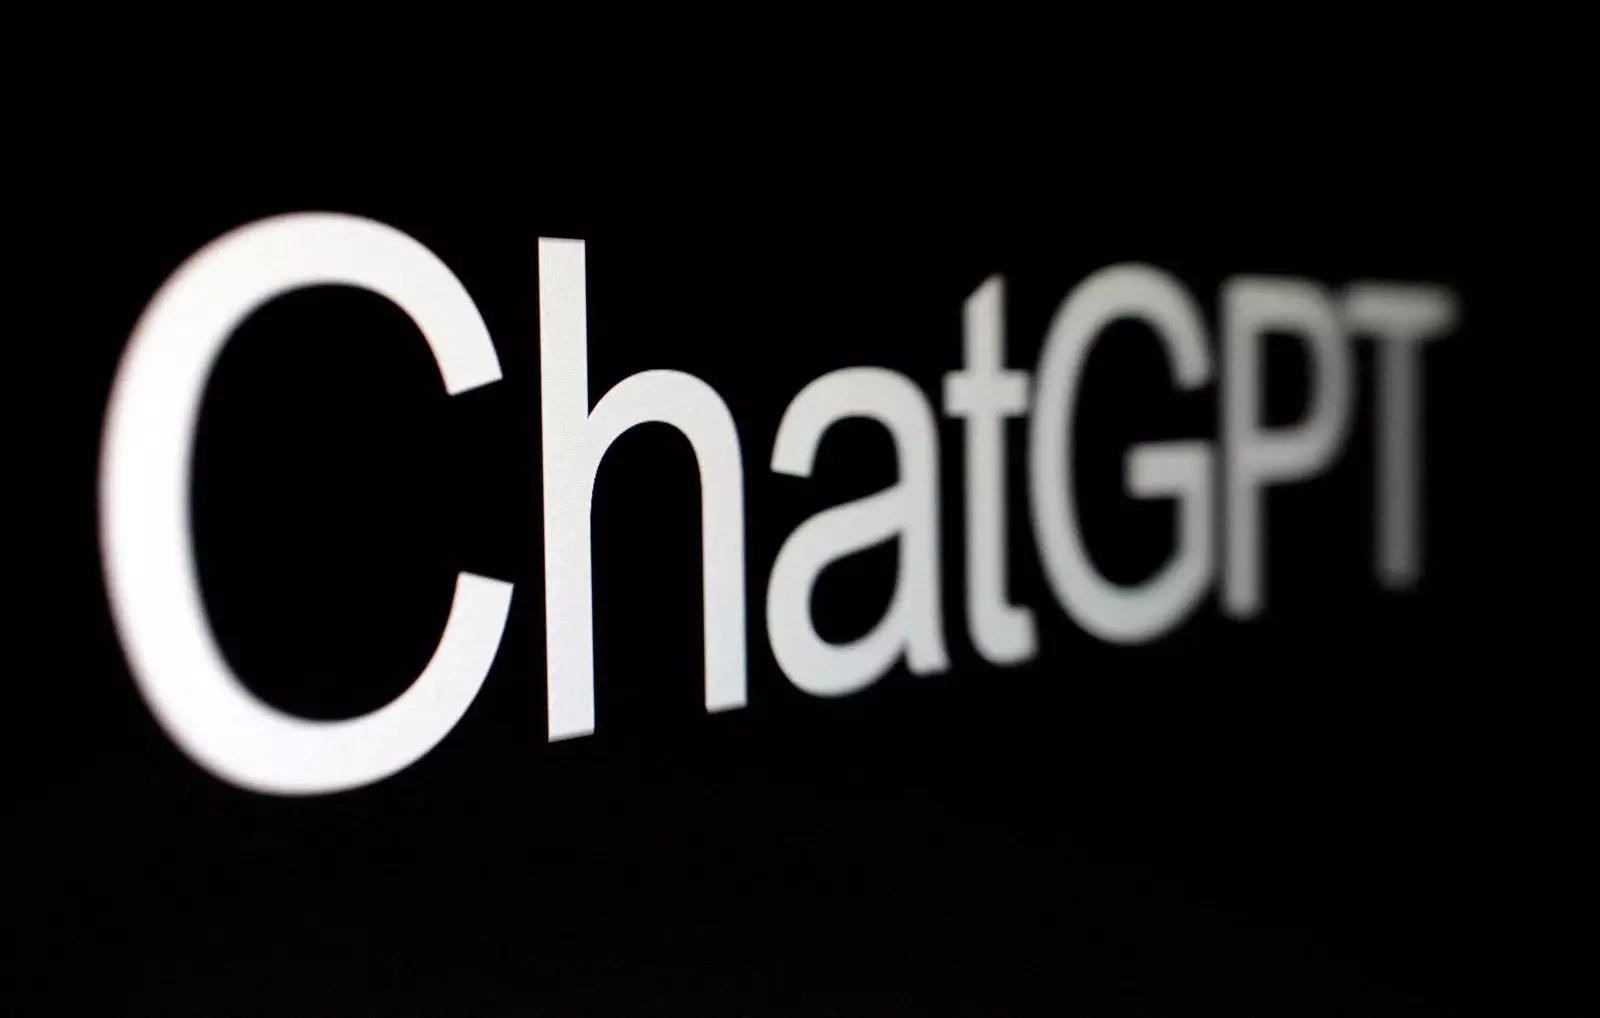 UK cyber security firm warns over ChatGPT